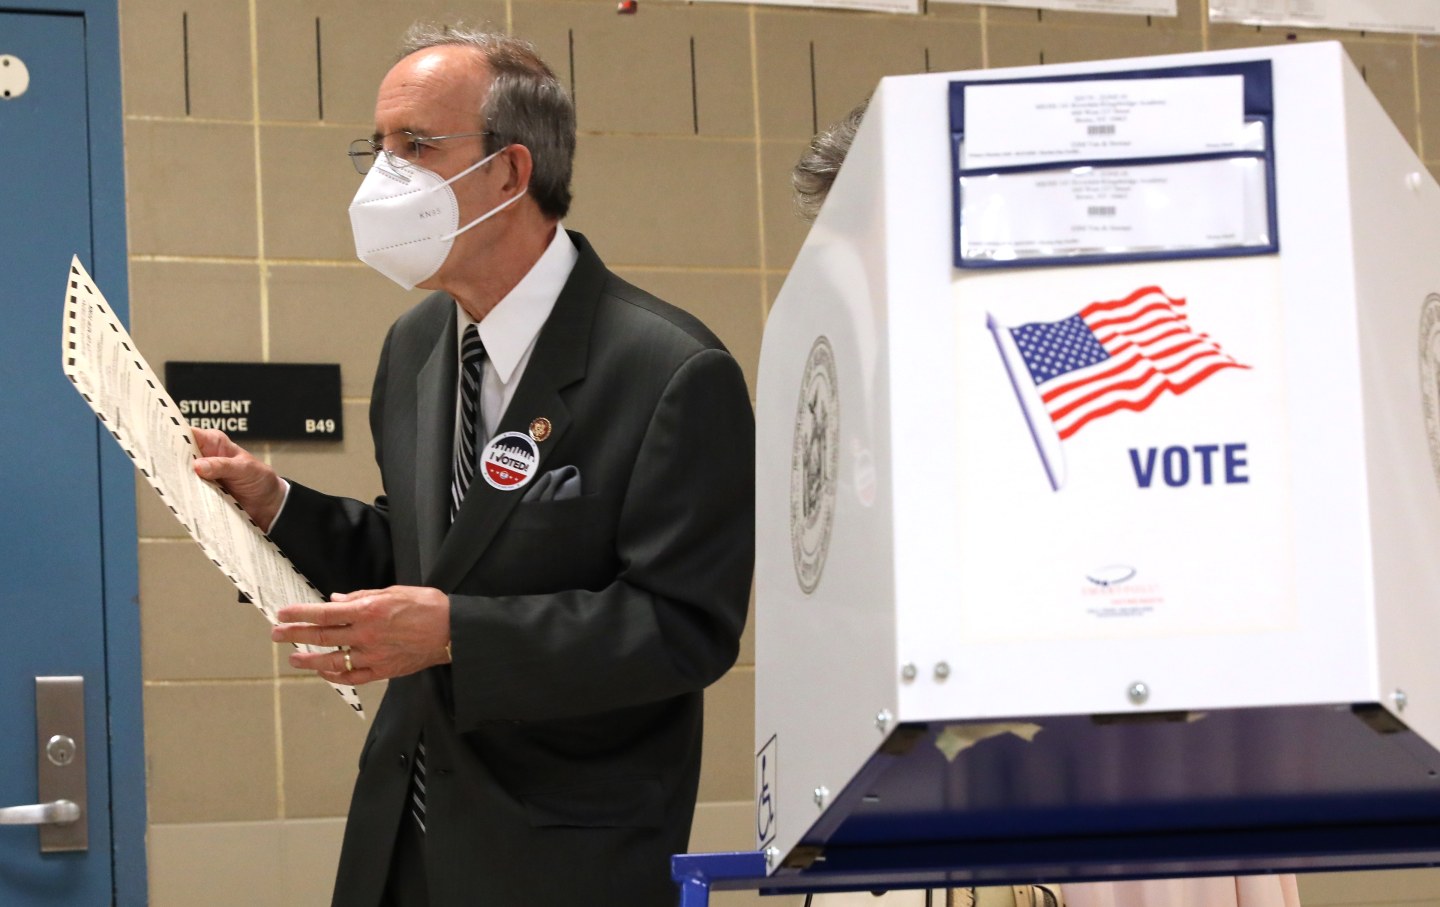 Eliot Engel walks past a voting booth